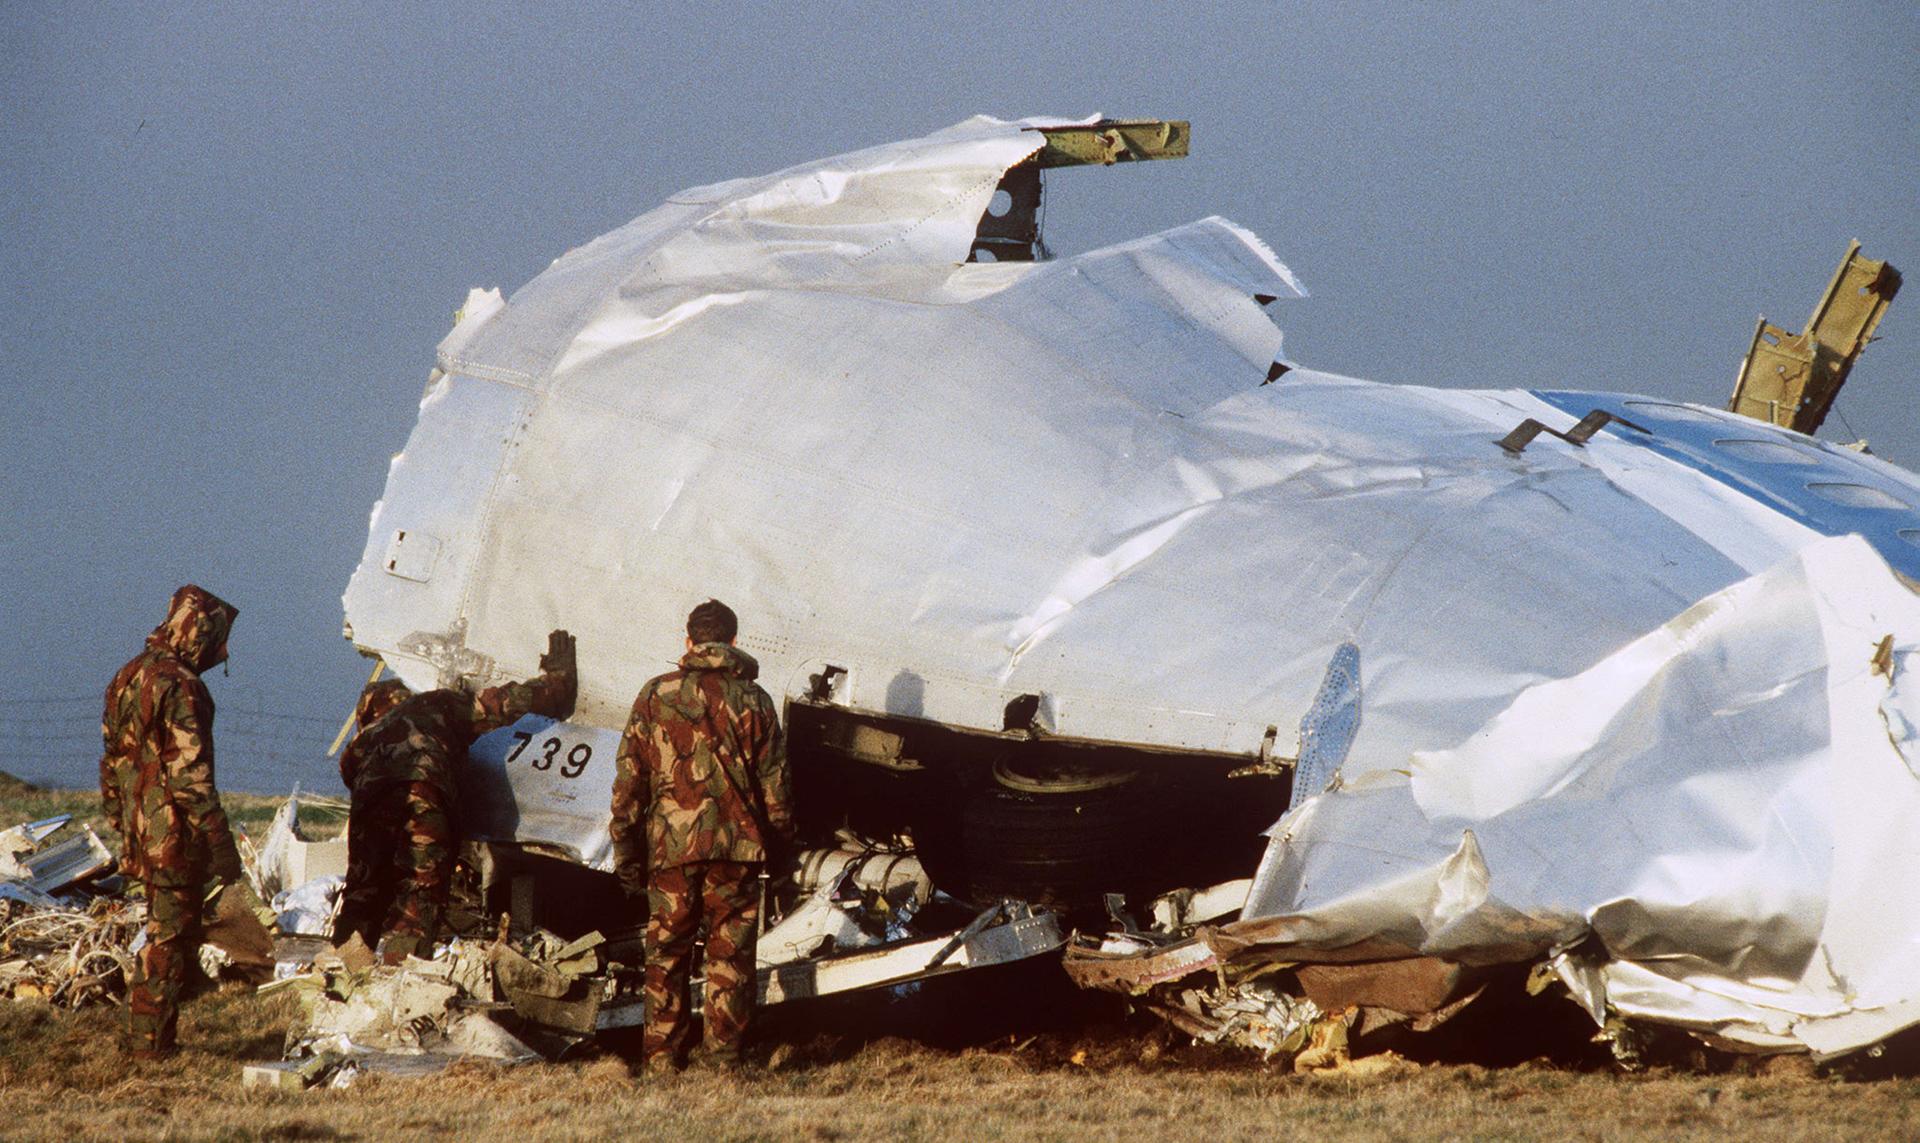 Crash investigators search the area around the cockpit of Pan Am flight 103 in a farmer's field east of Lockerbie Scotland after a mid-air bombing killed all 259 passengers and crew, and 11 people on the ground.